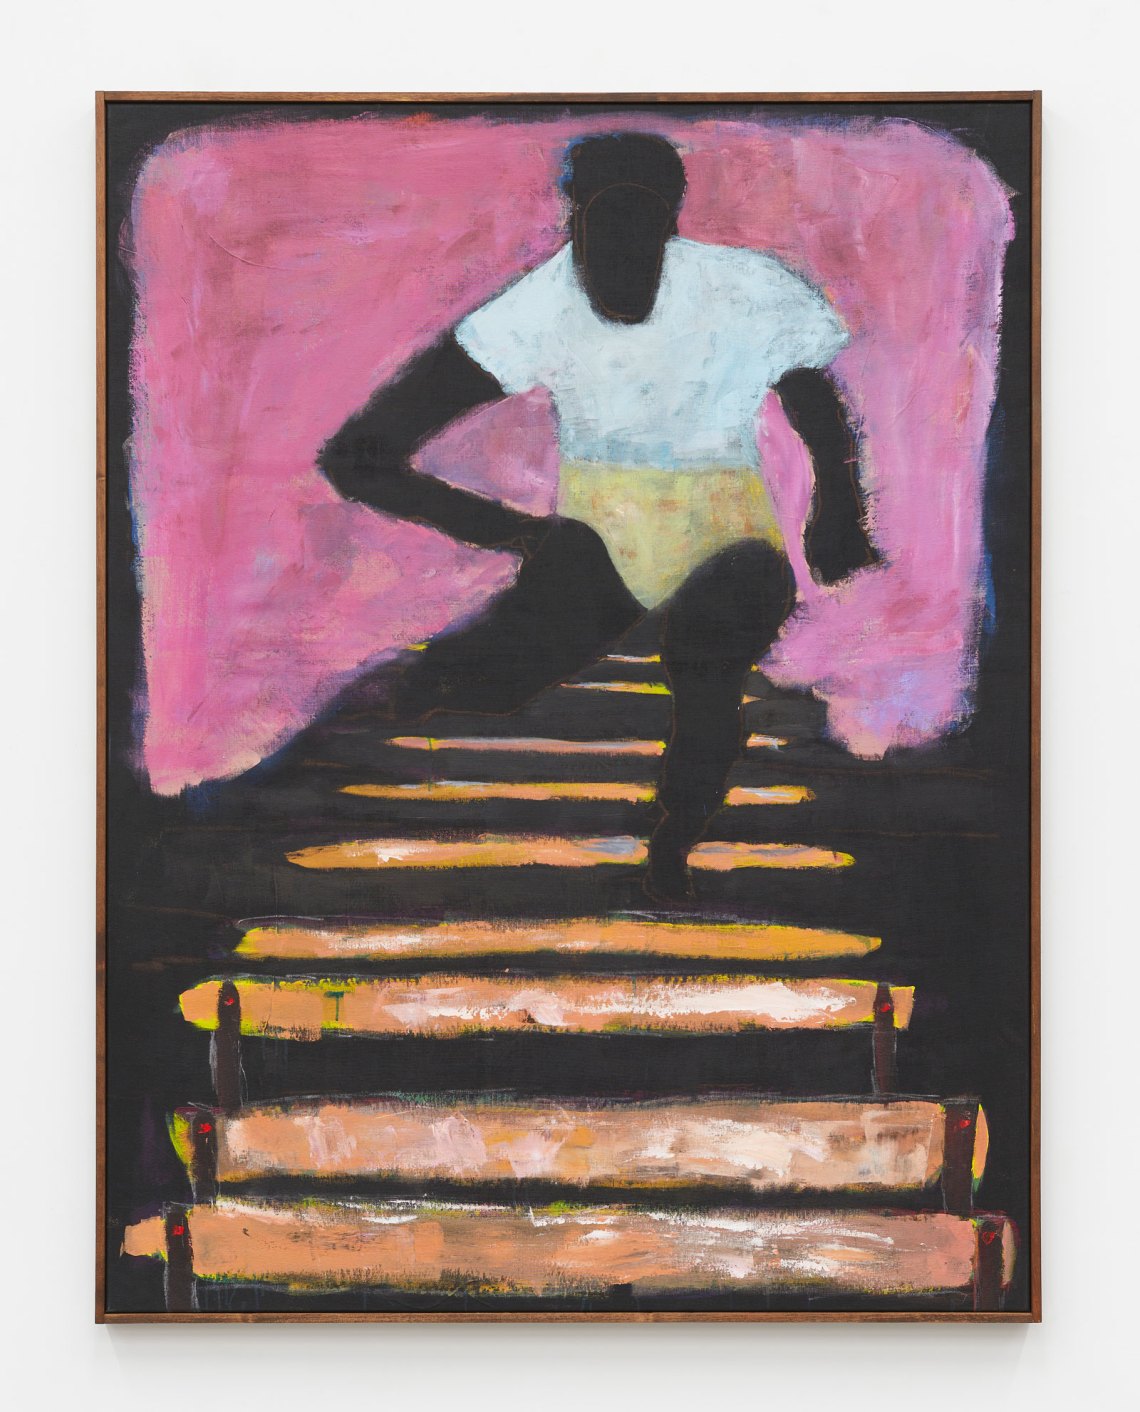 A black man jumping over hurdles with a pink background